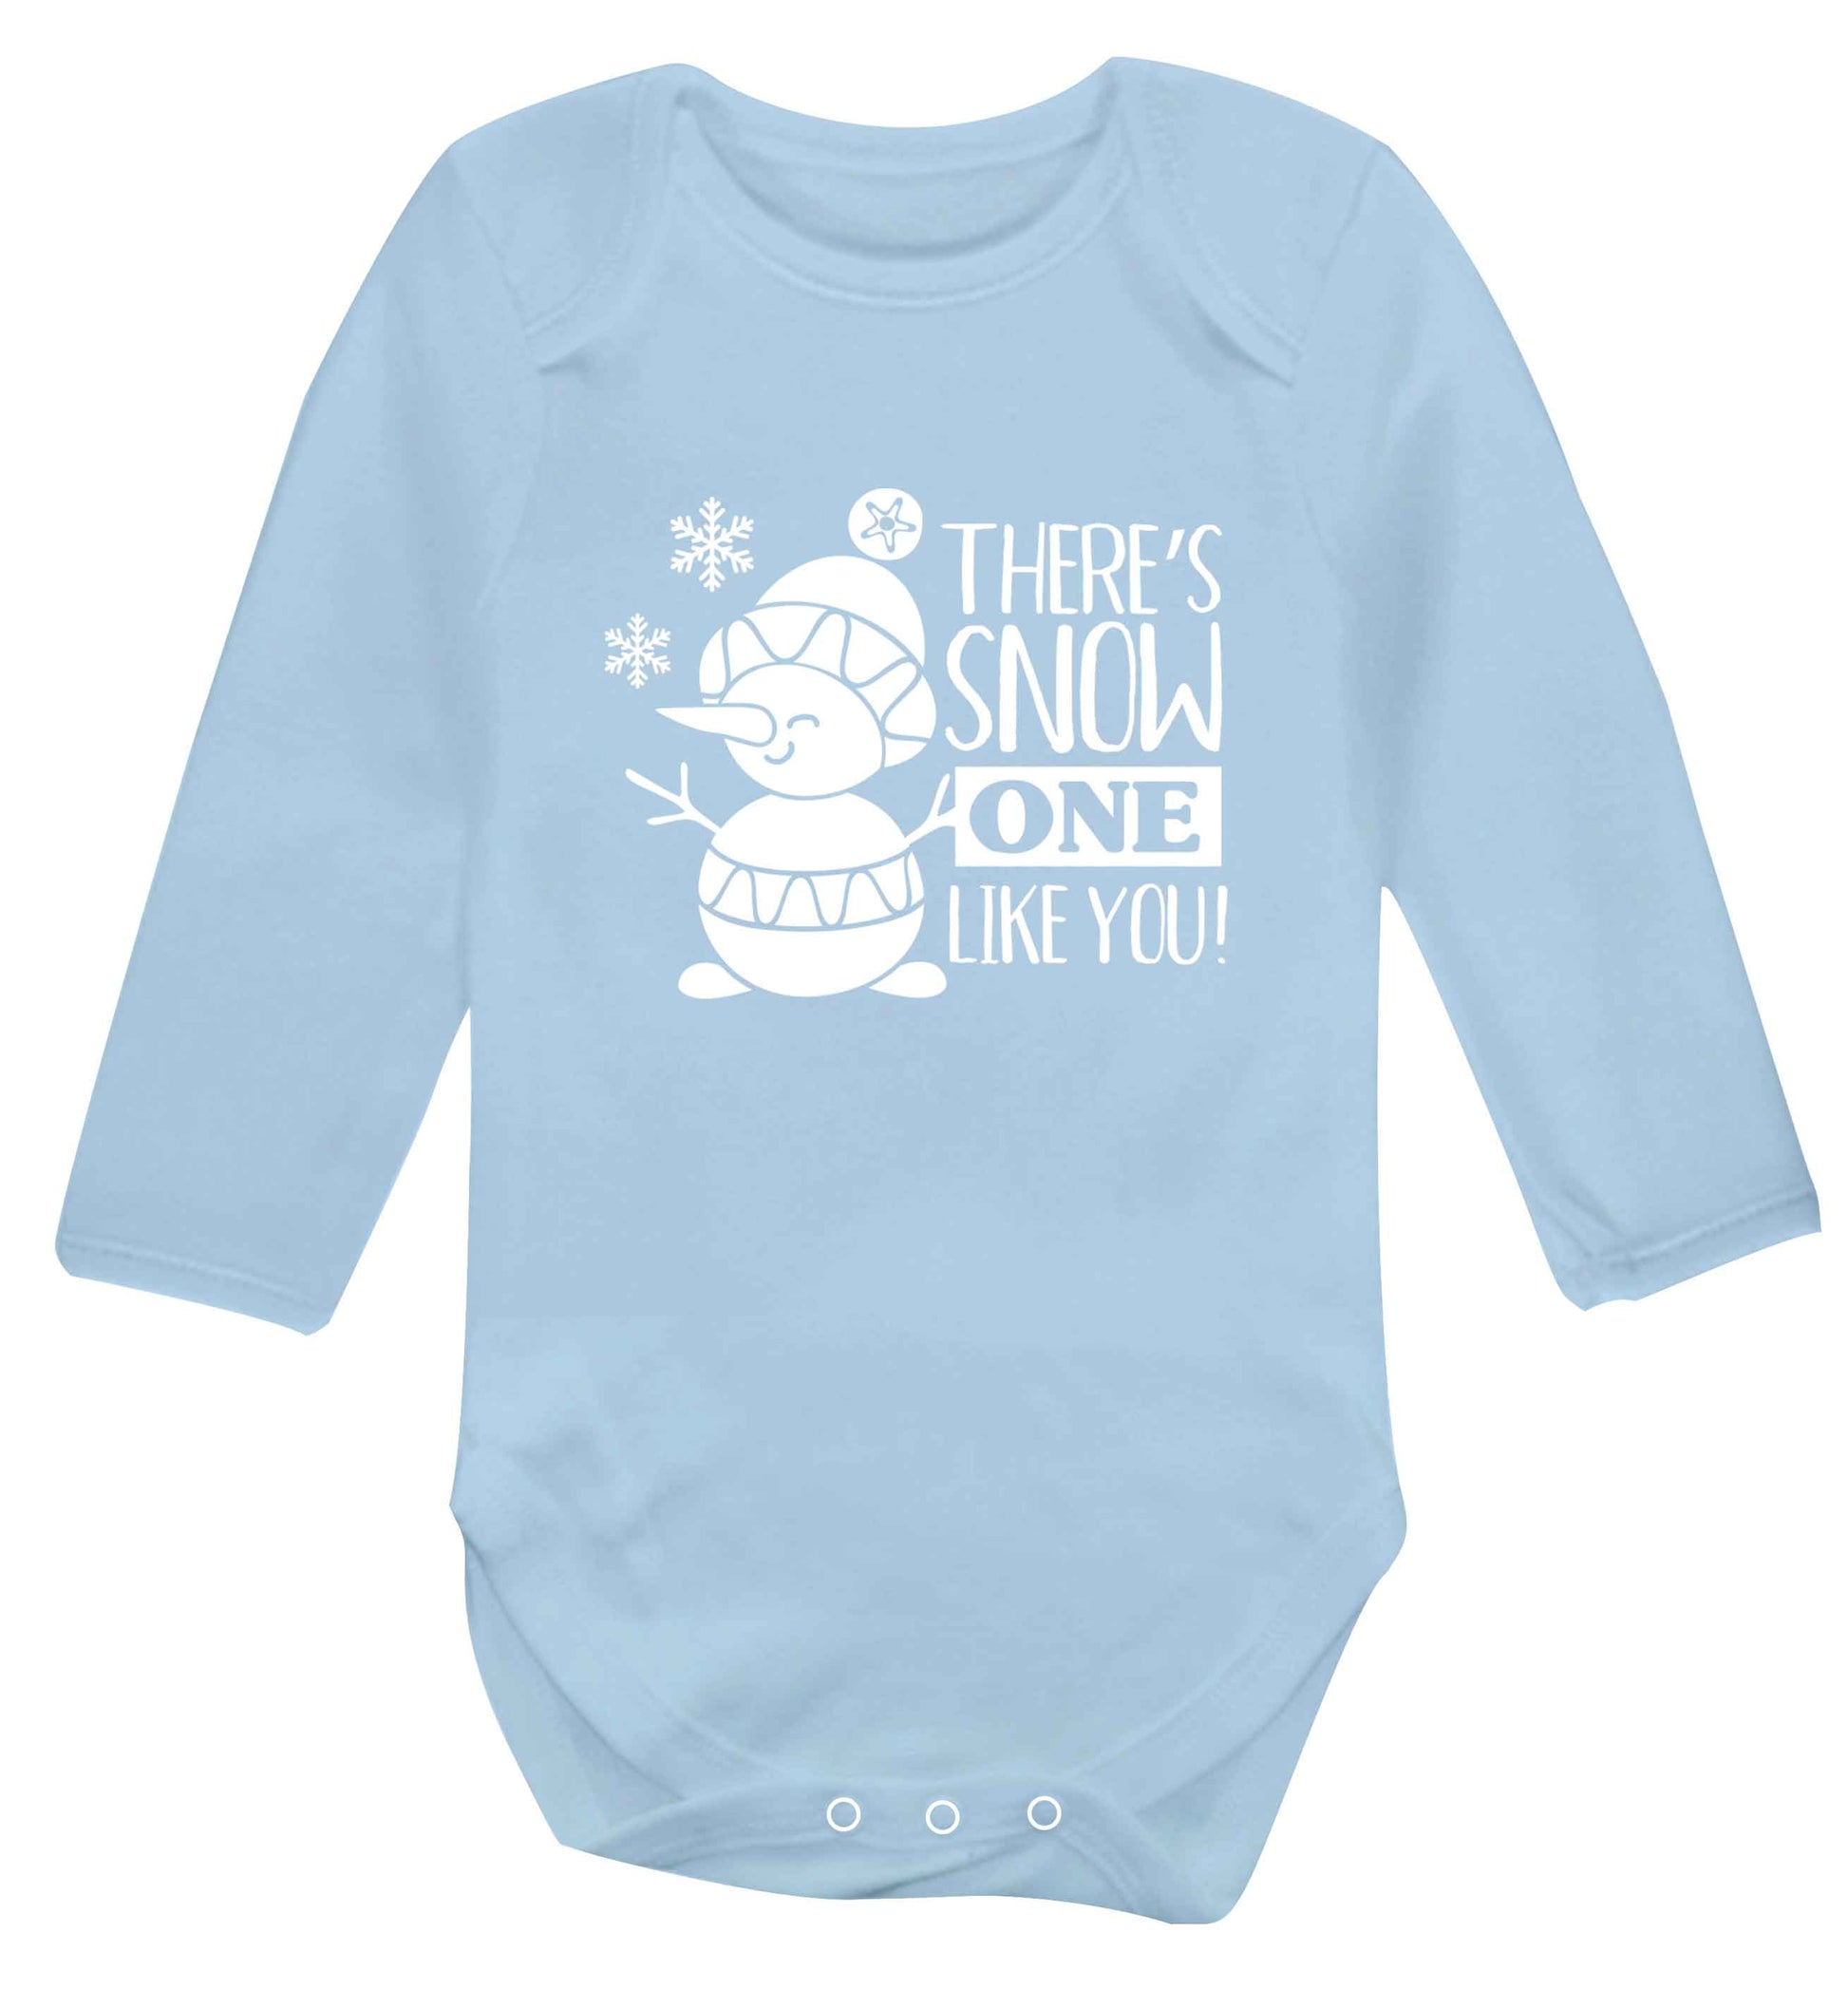 There's snow one like you baby vest long sleeved pale blue 6-12 months